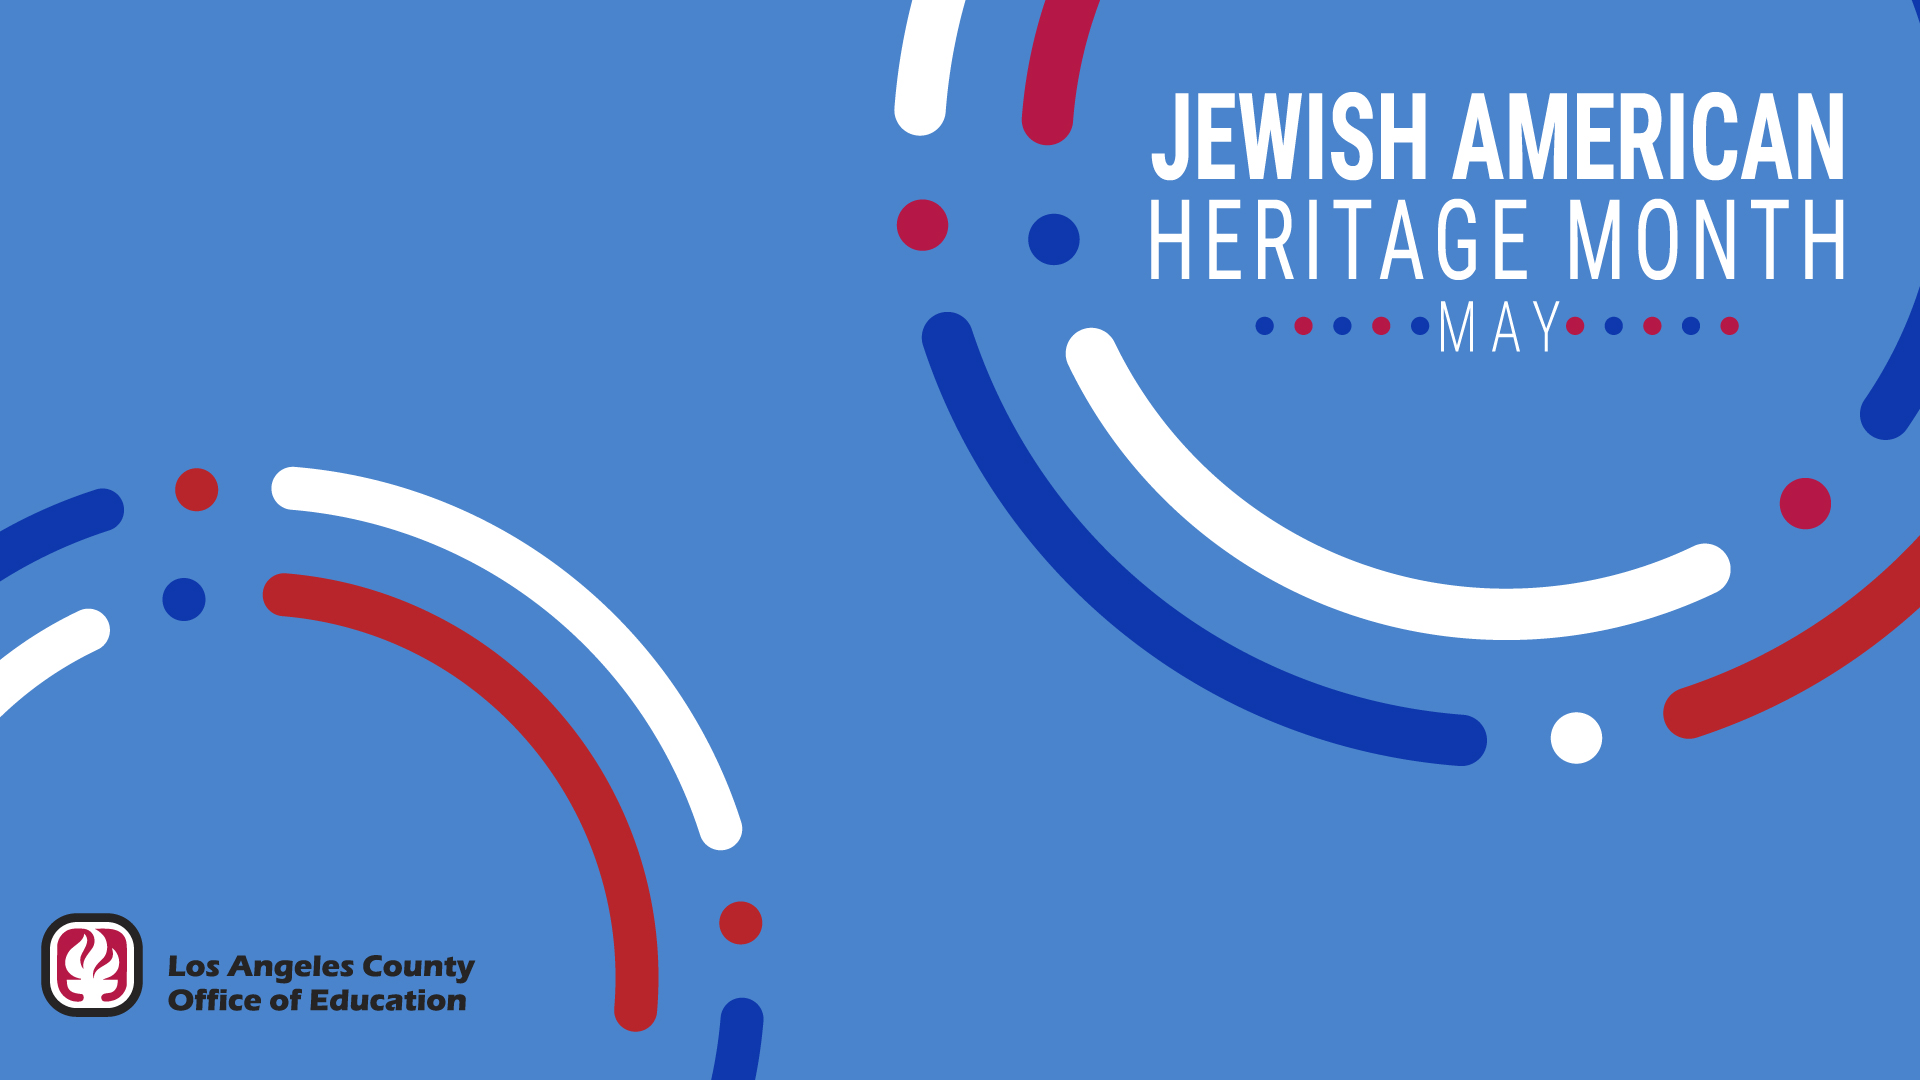 Decorative banner with text "Jewish American Heritage Month" May